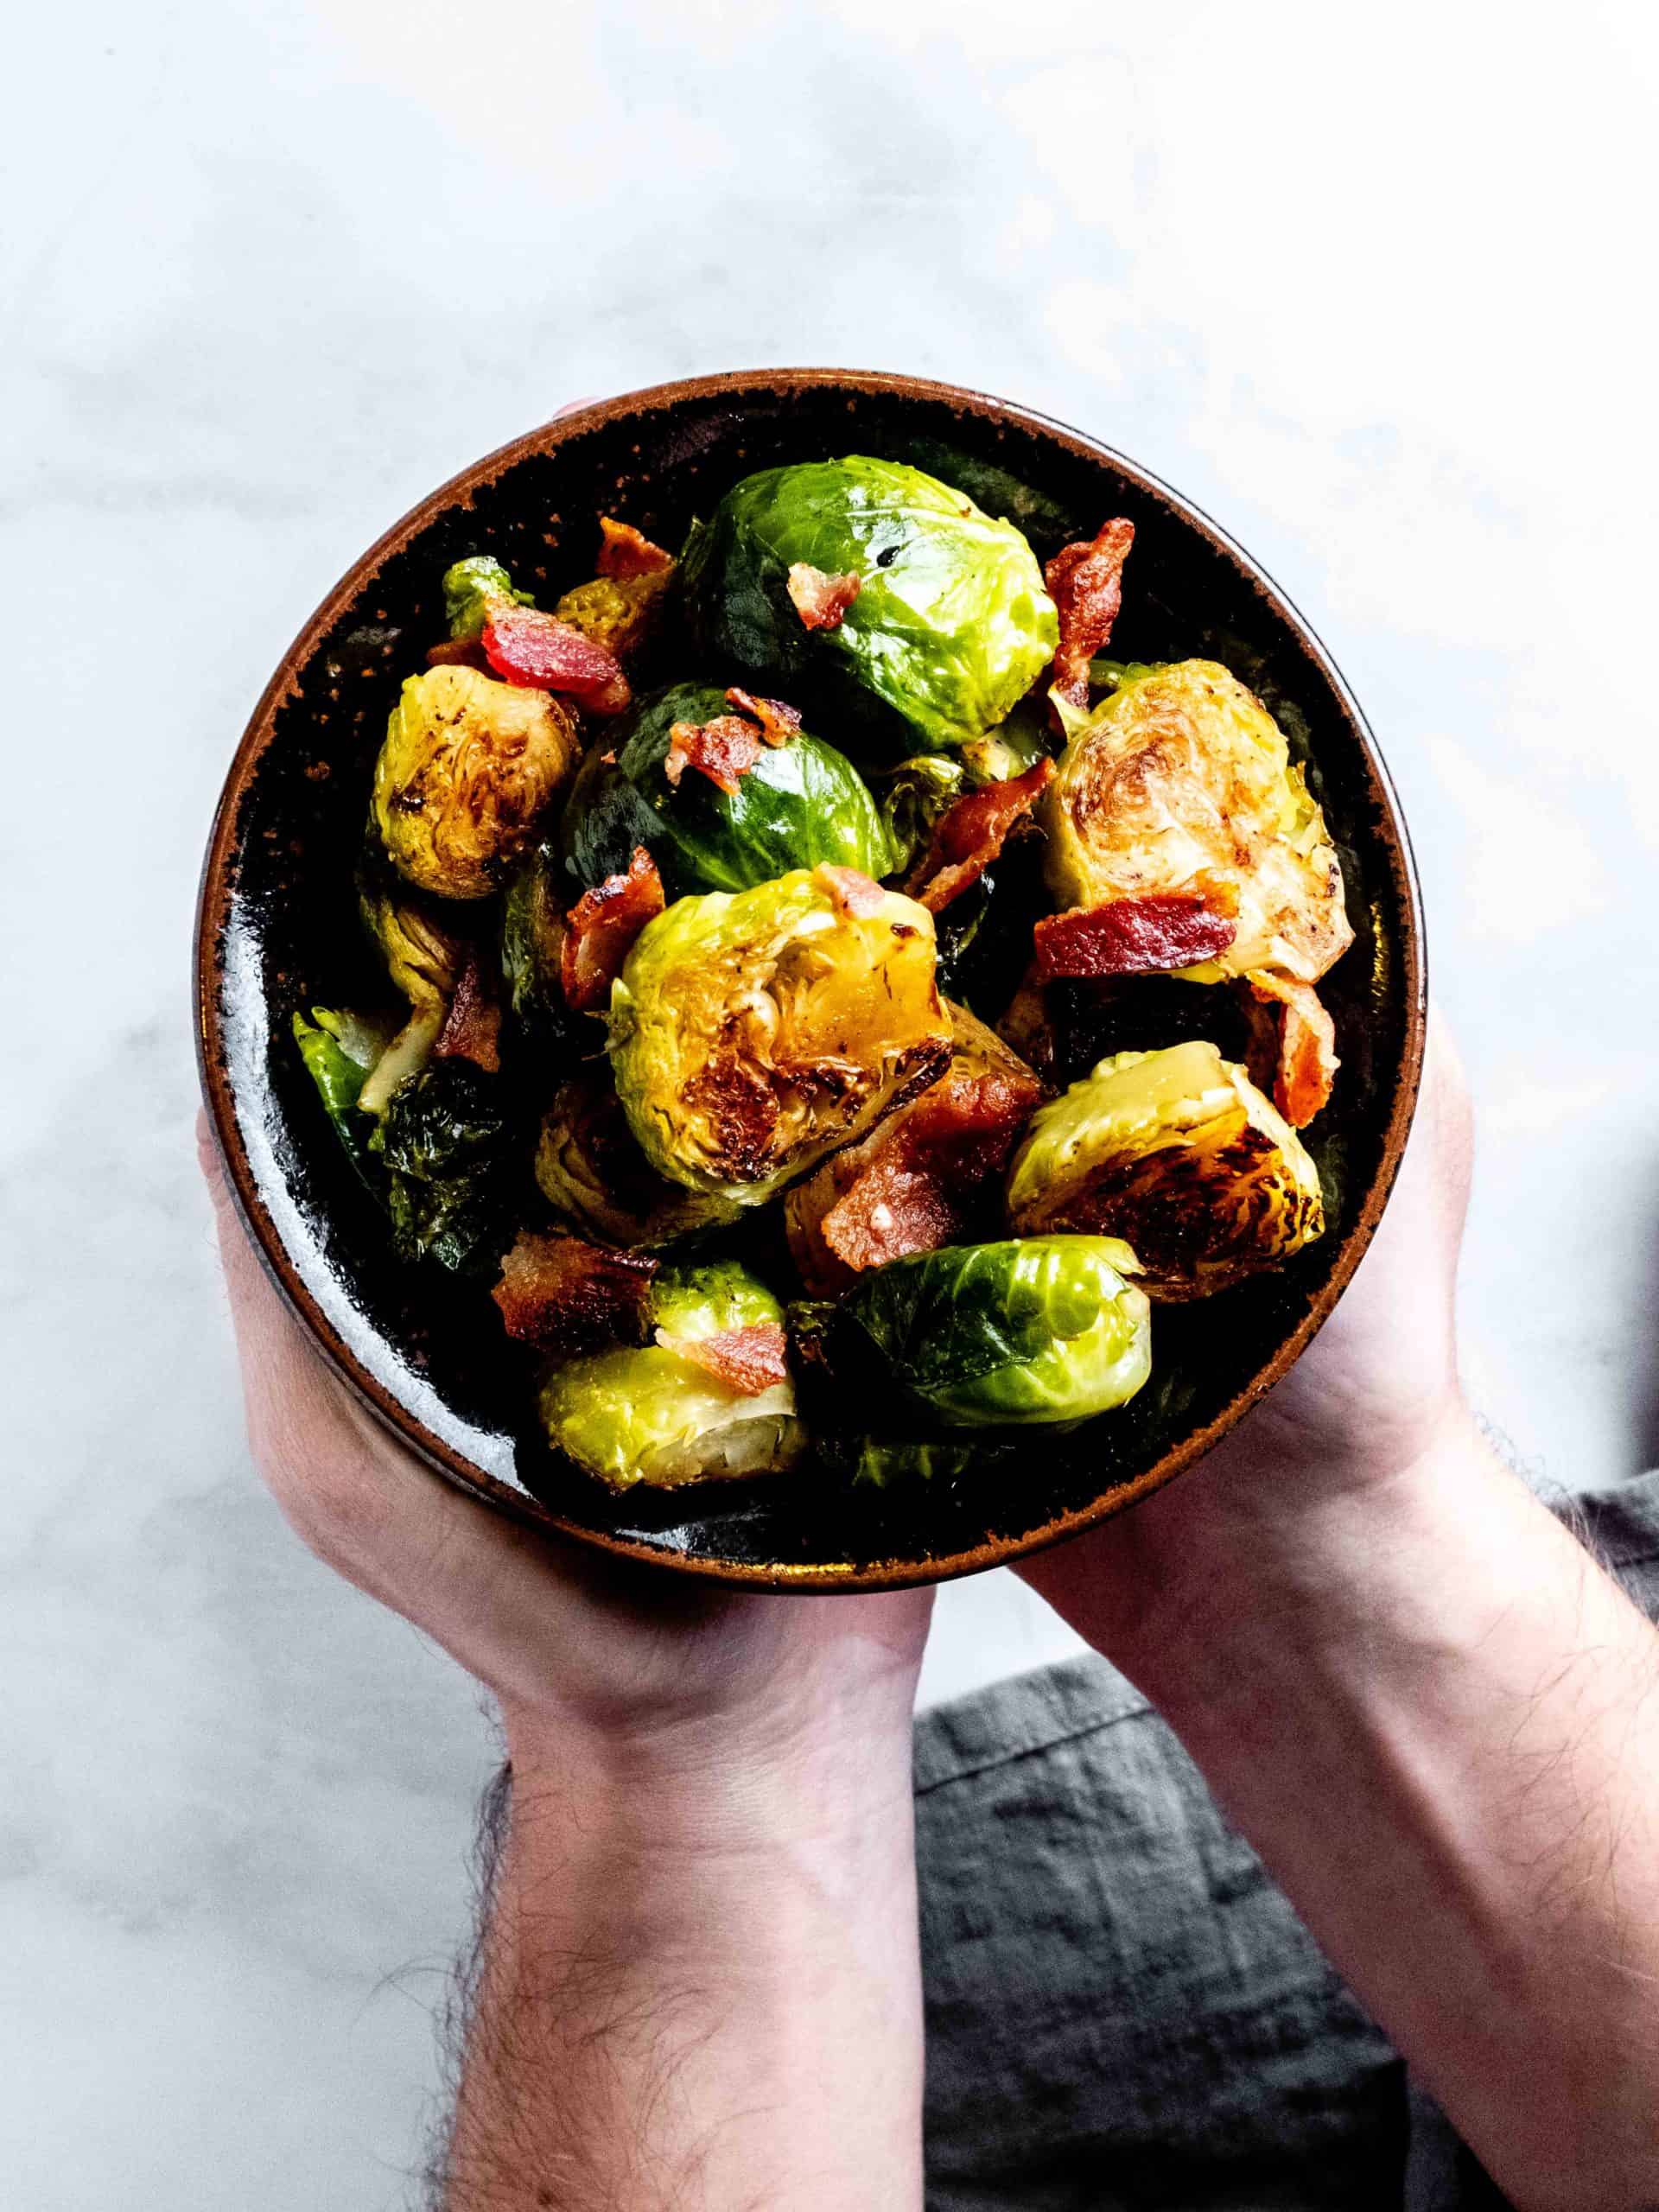 holding a bowl of sauteed brussels sprouts